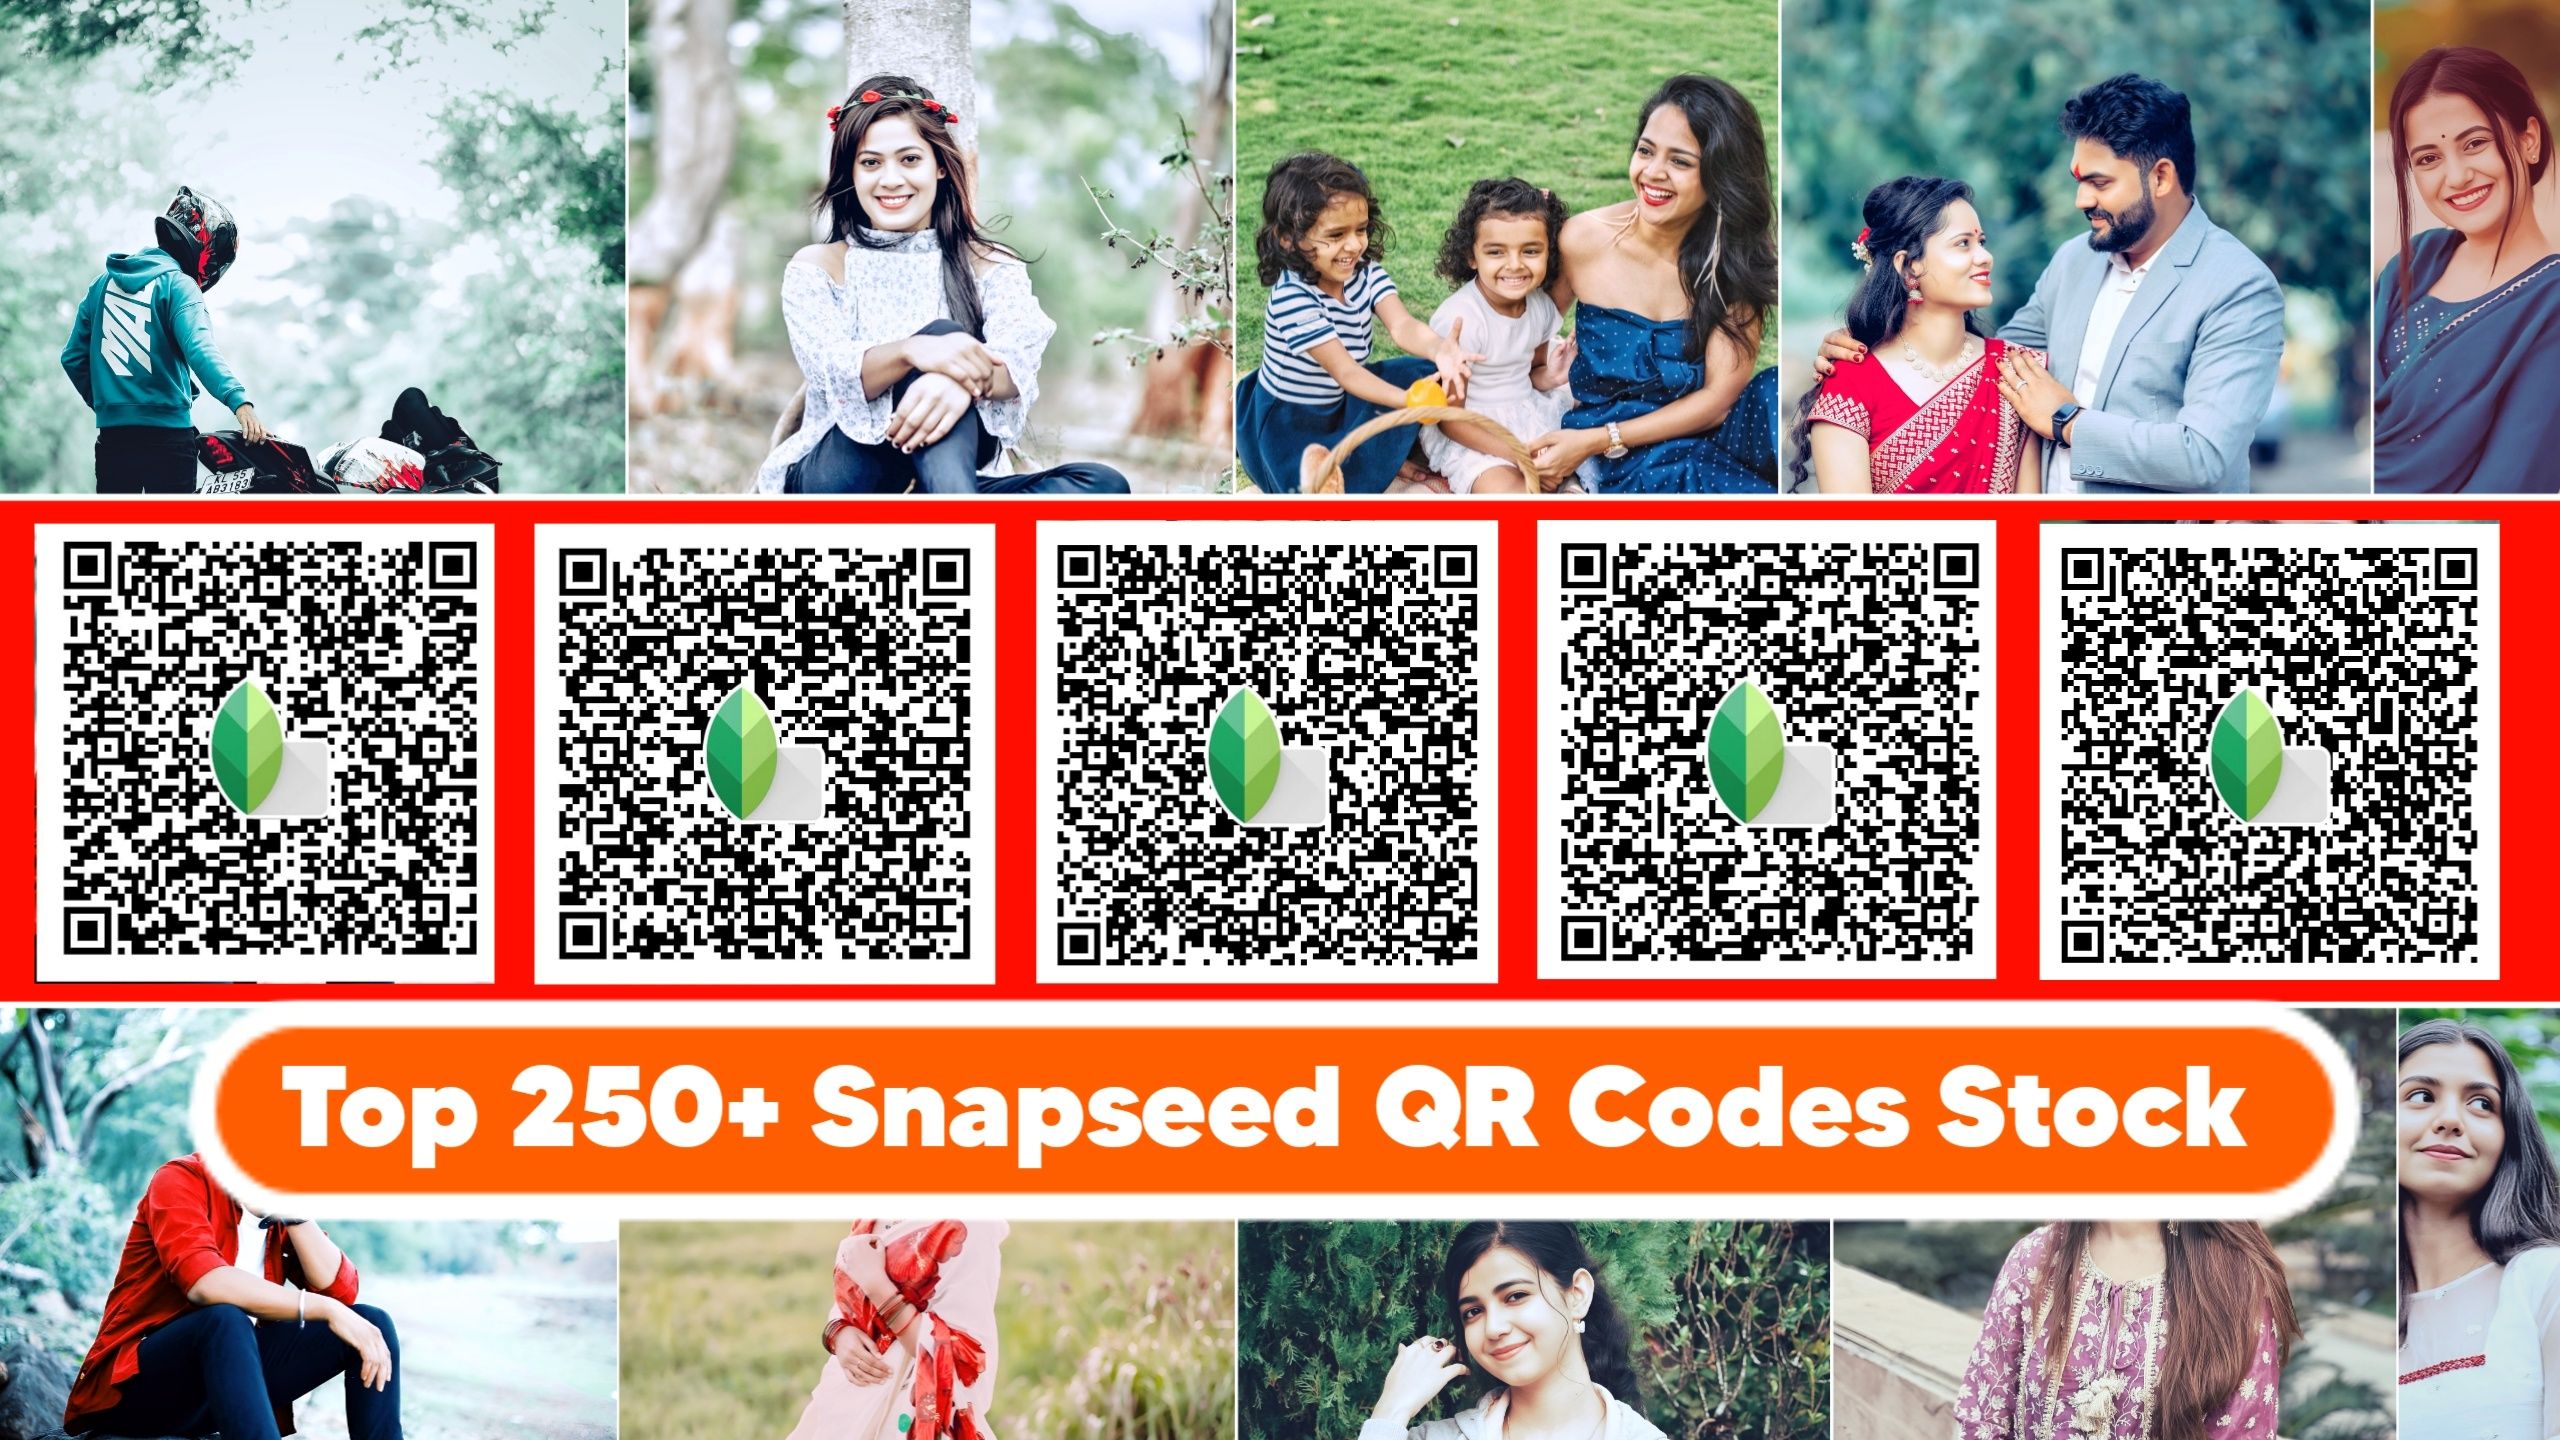 Top 250+ Snapseed QR Codes Stock